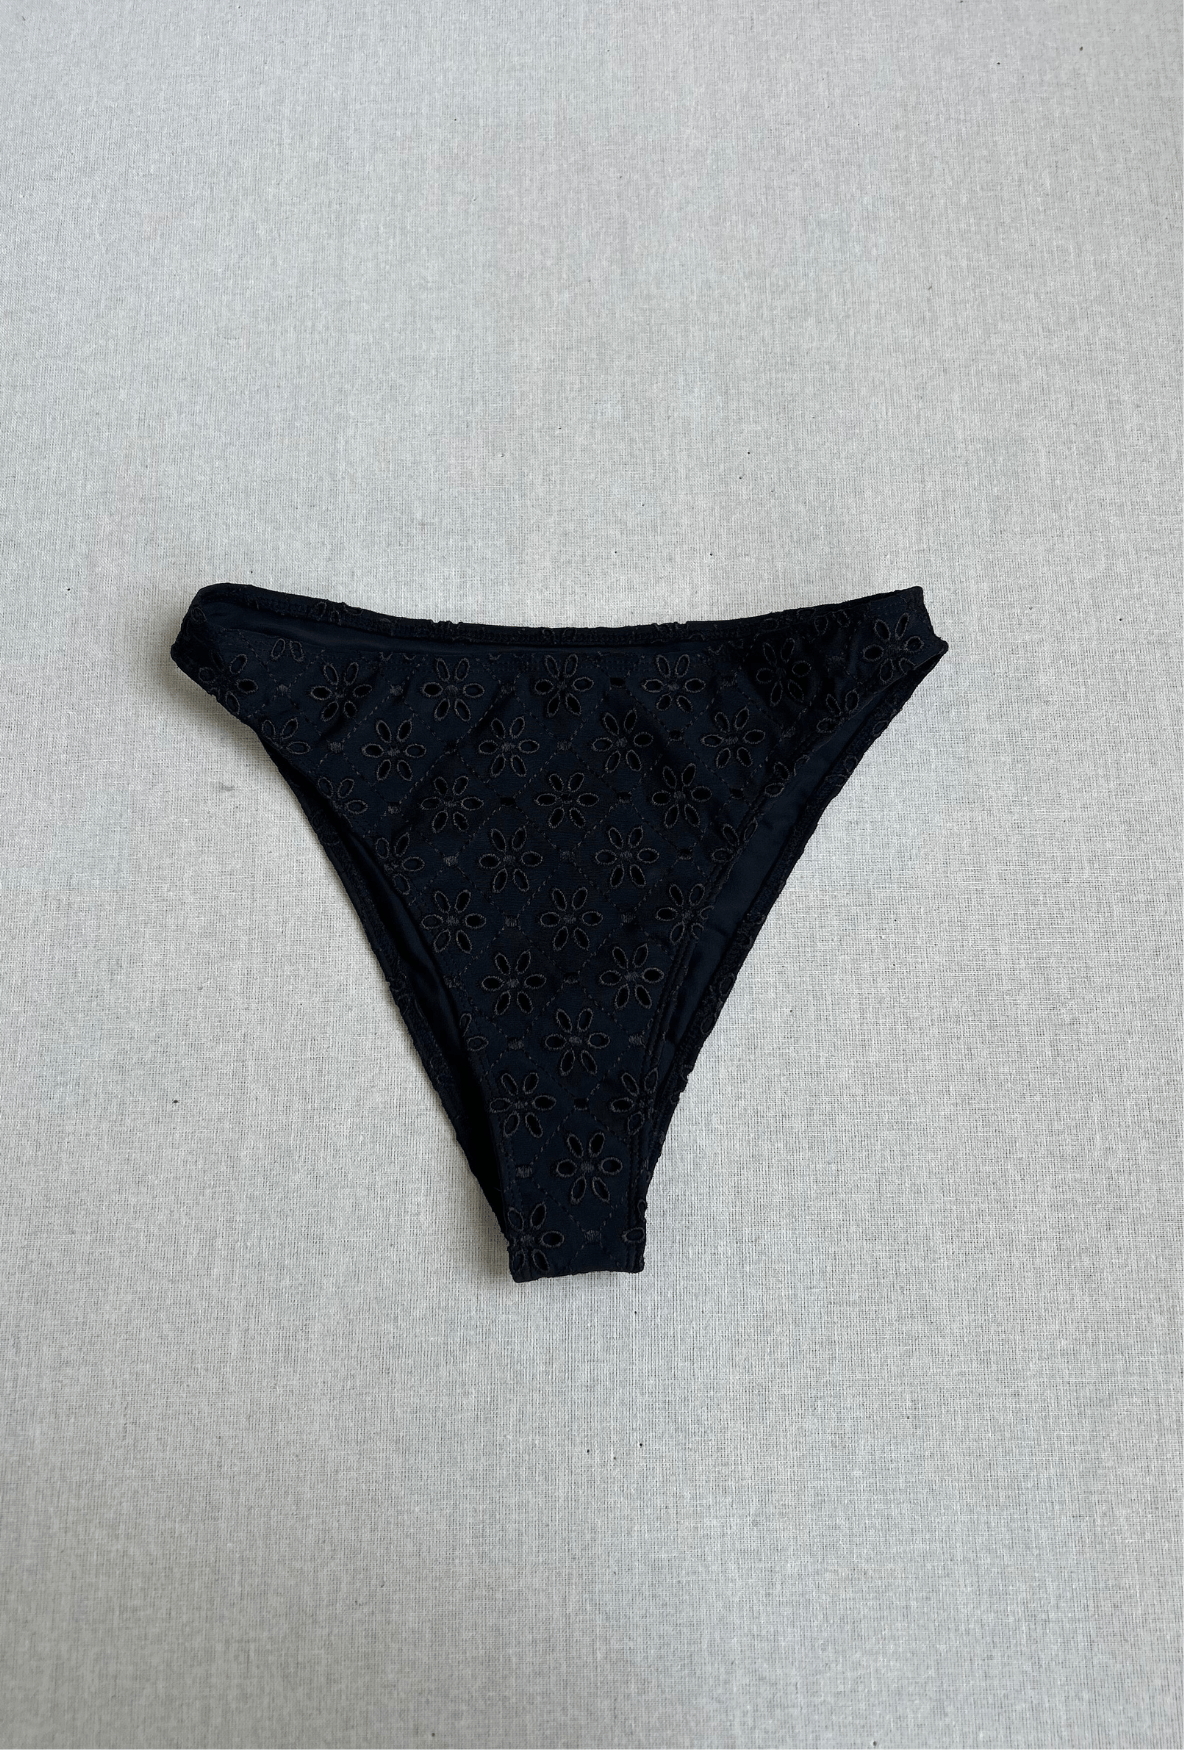 Eyelet Bottom in size small